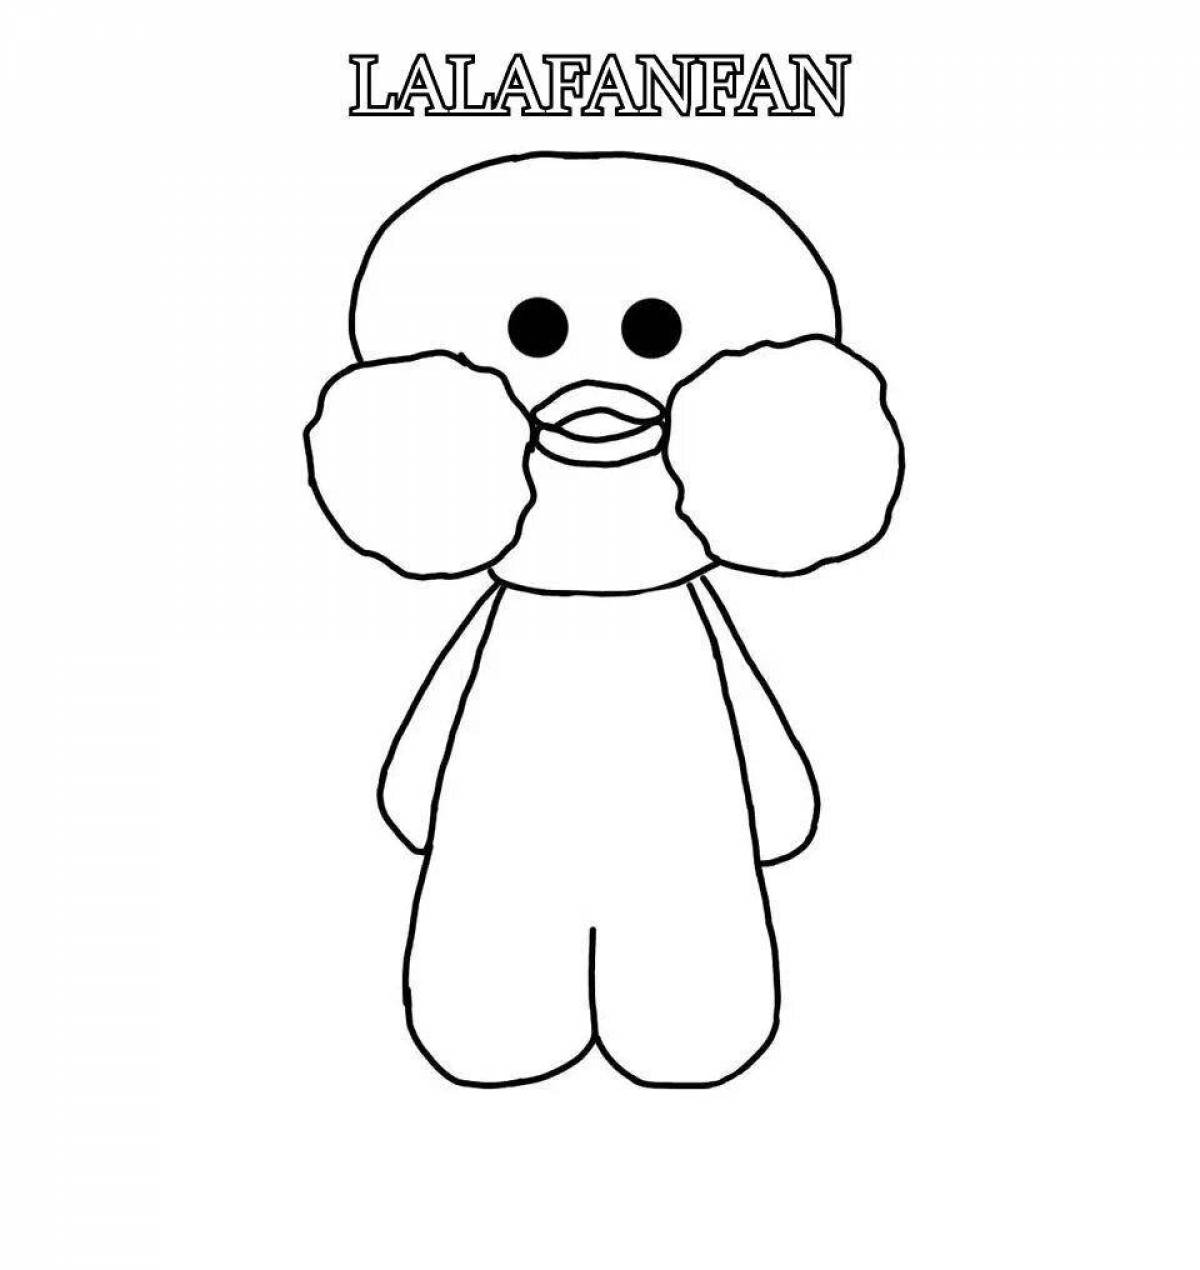 Coloring page delightful duck lalafanfan